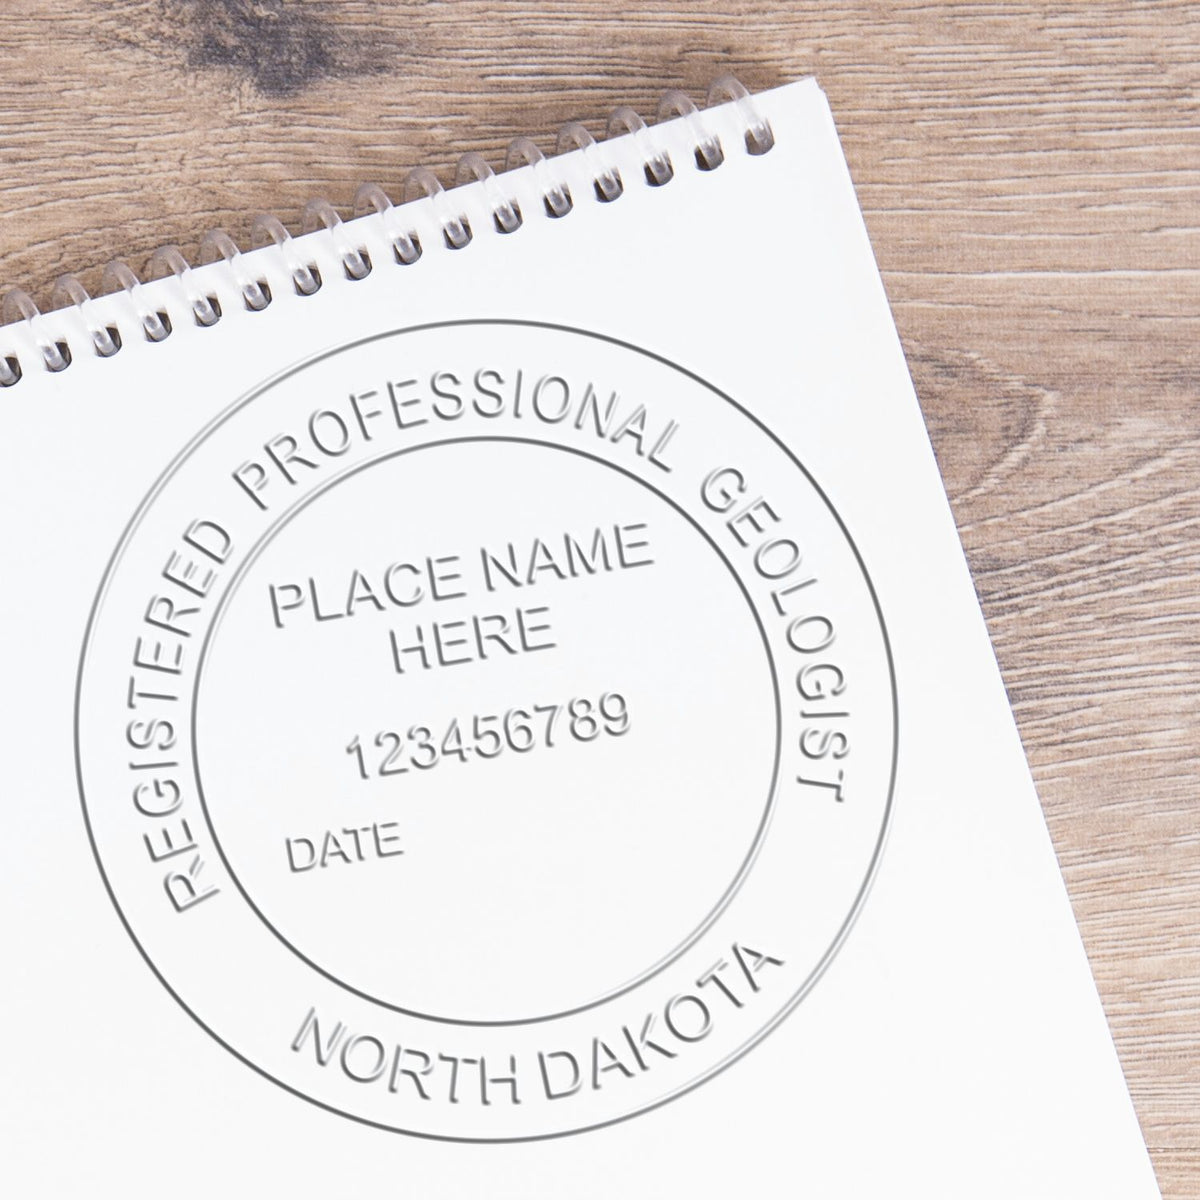 A photograph of the Soft North Dakota Professional Geologist Seal stamp impression reveals a vivid, professional image of the on paper.